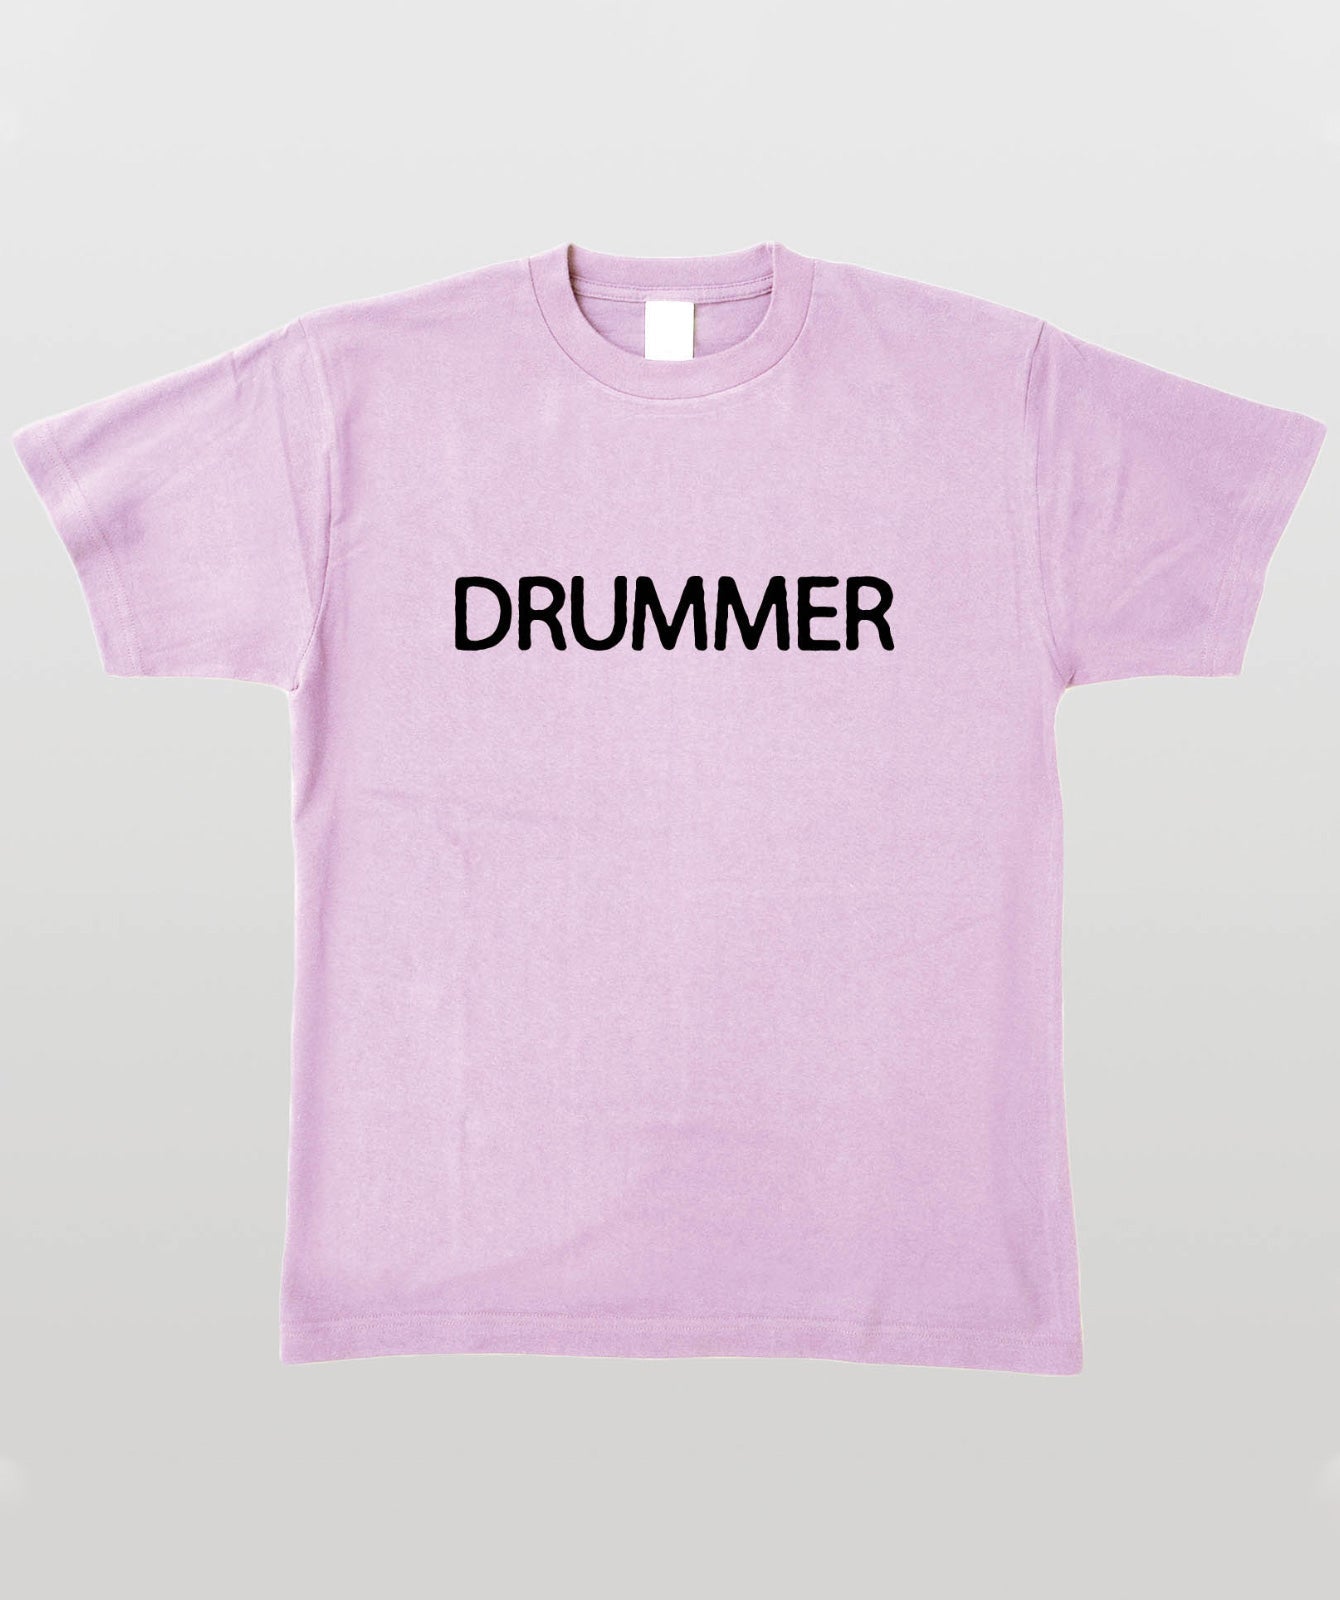 MS PLAYER SERIES ～DRUMMER Type A～